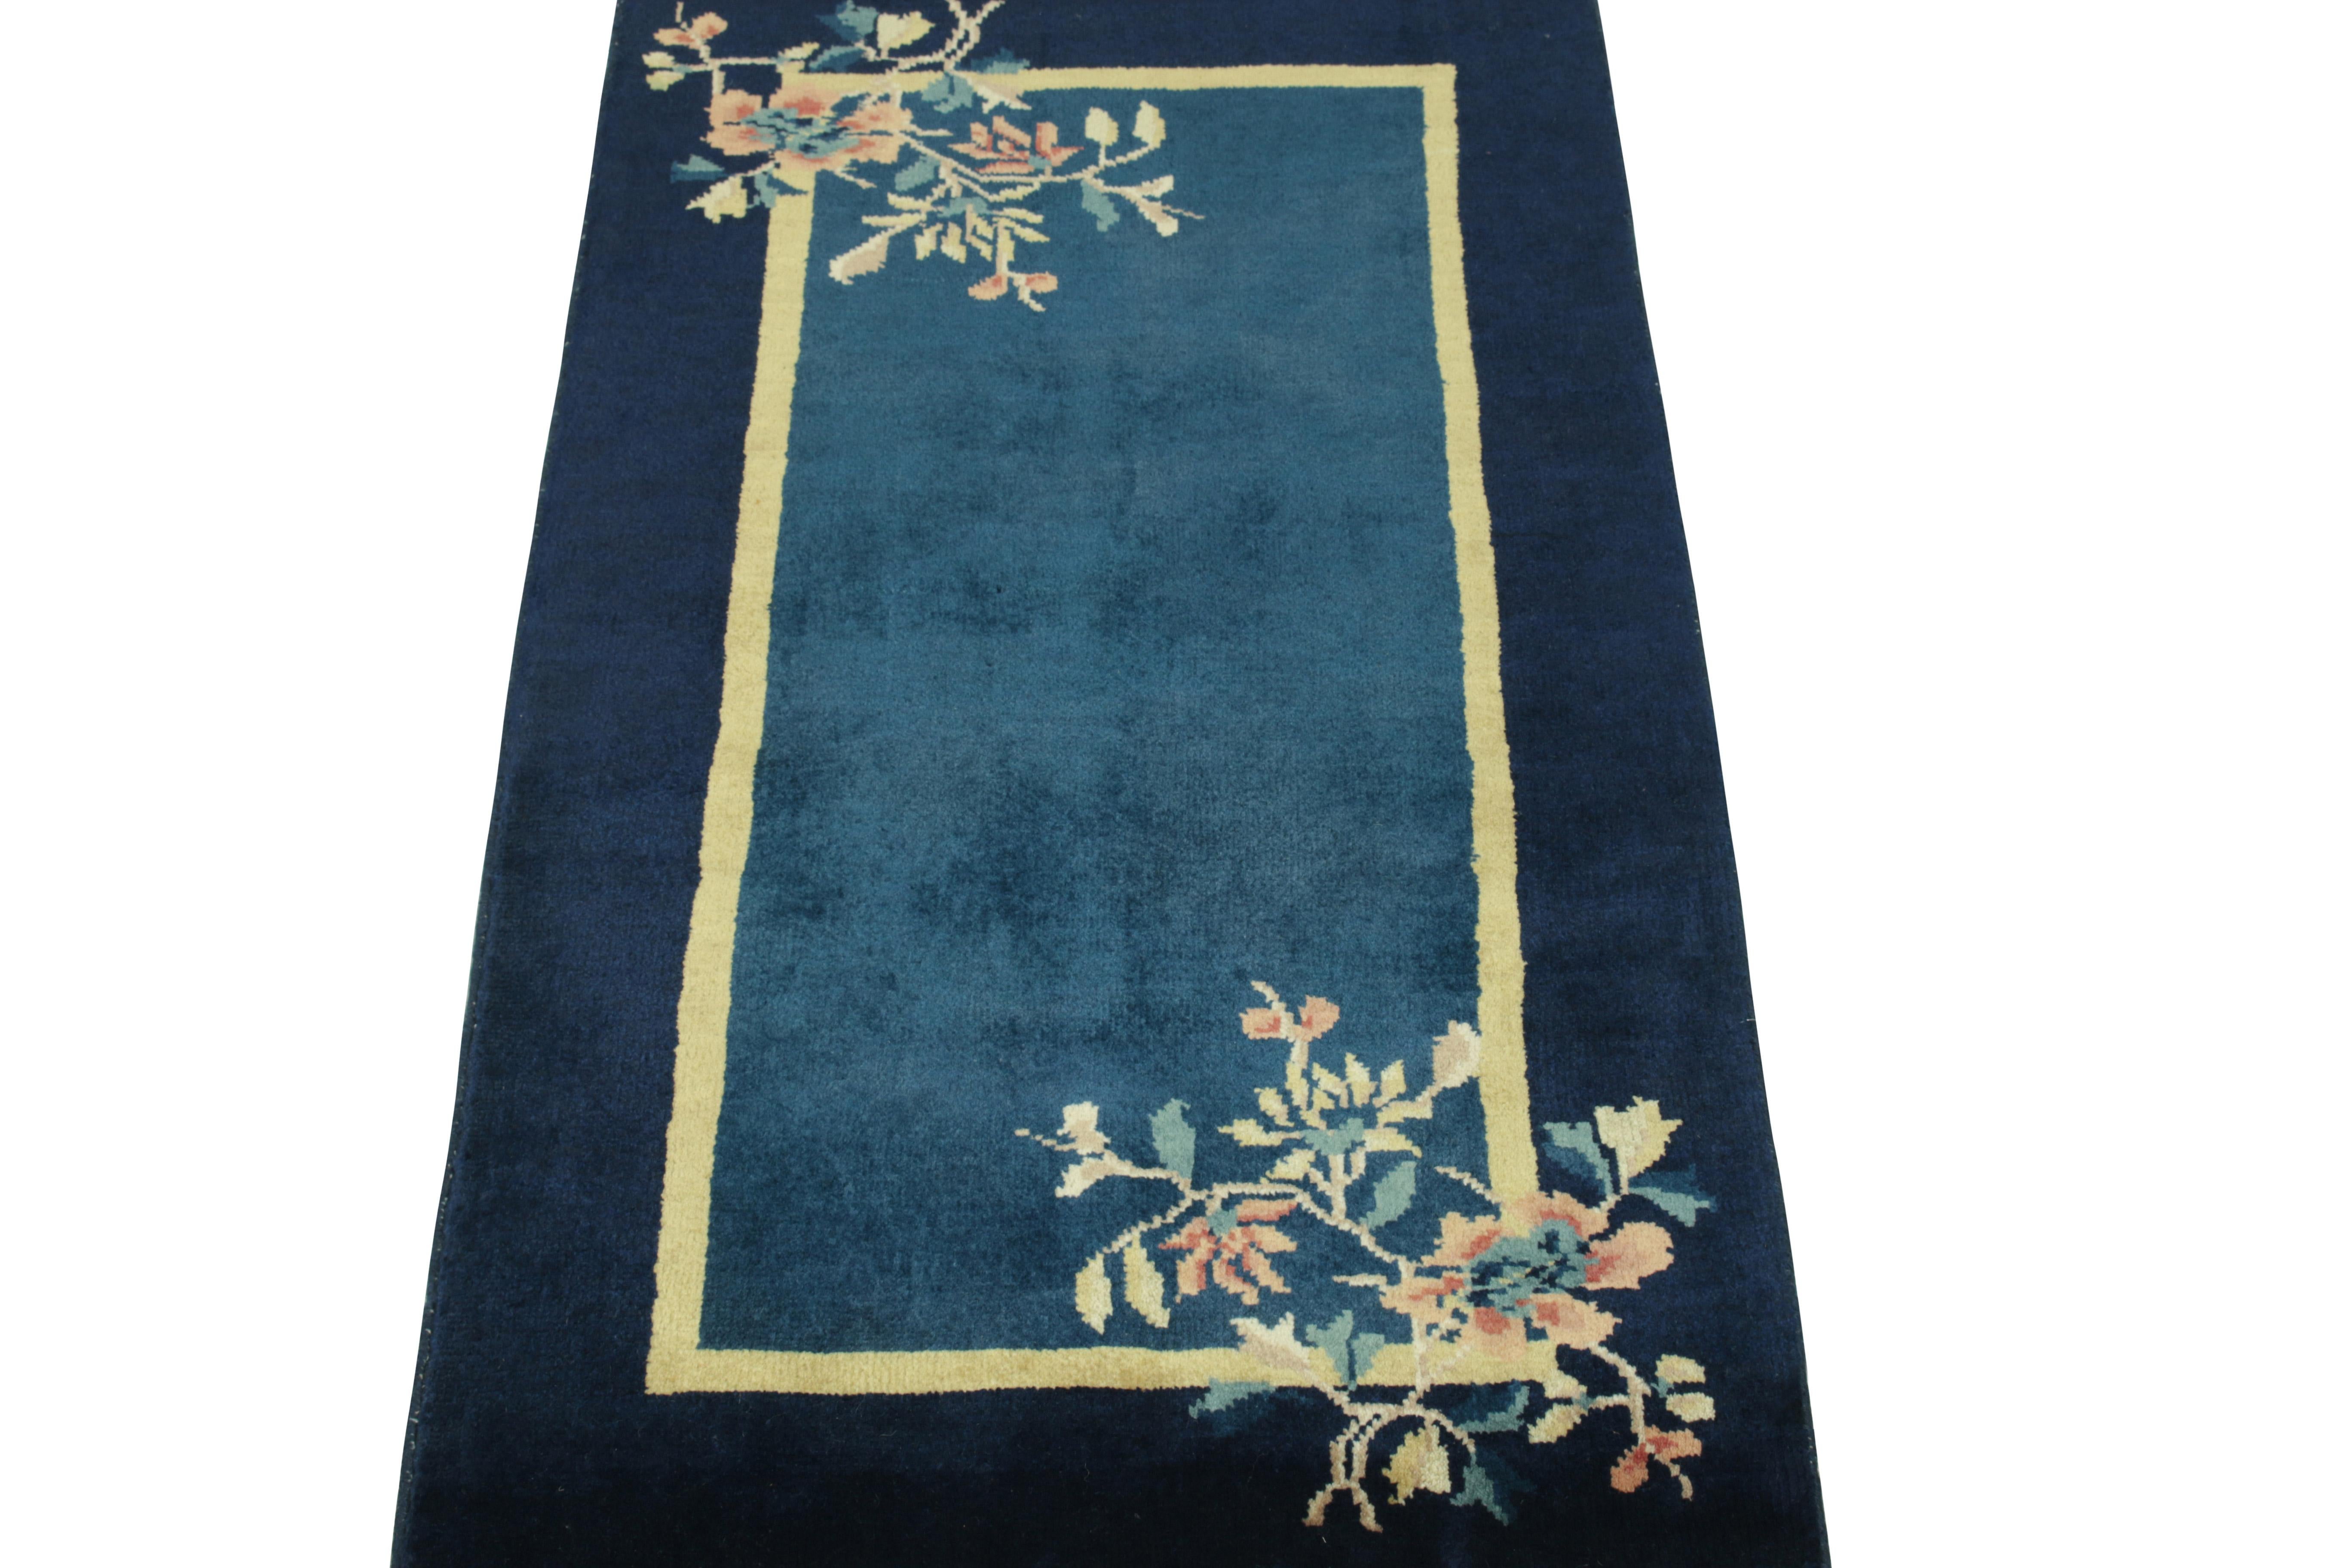 Boasting a floral pattern in teal, reddish orange & sky blue tones in the outer border, a Chinese Deco style vintage rug with mild light-and-dark spots in blue tones connoting a very classic, lustrou appeal like the 1920s style of inspiration.